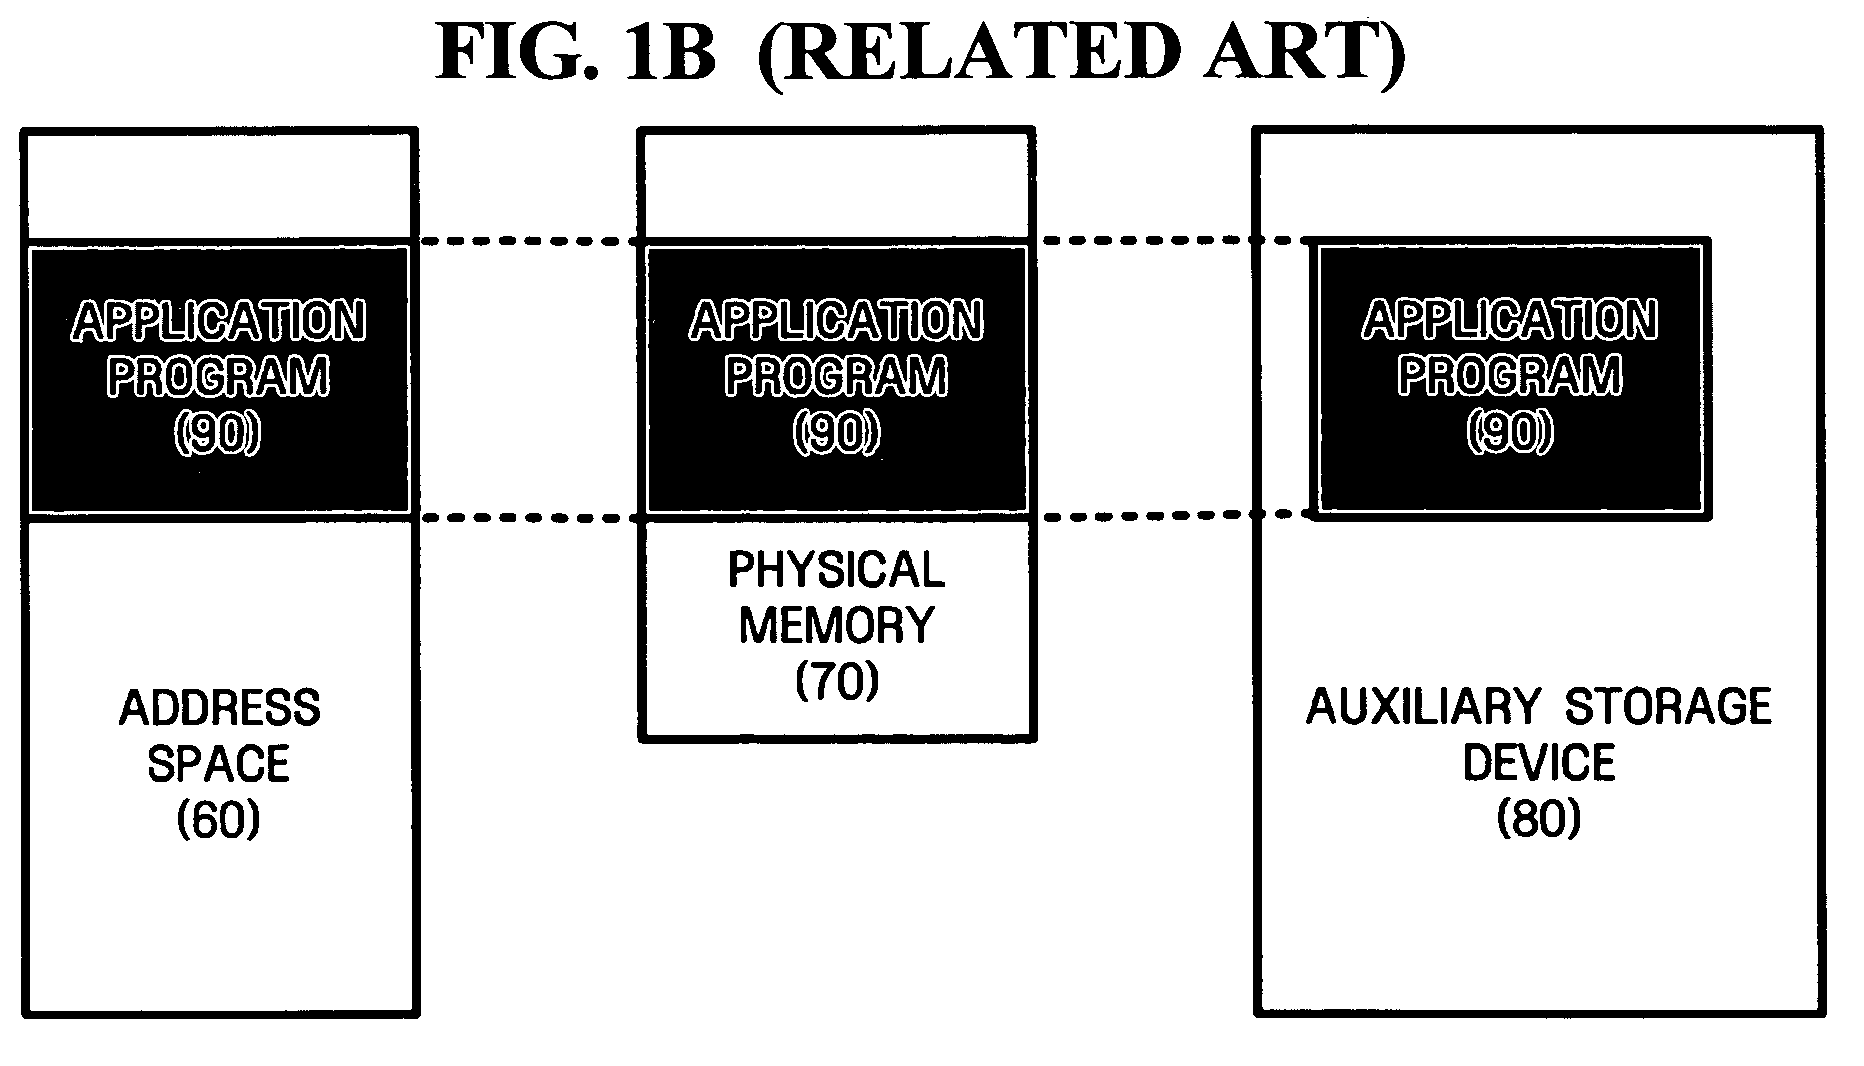 Demand paging apparatus and method for embedded system